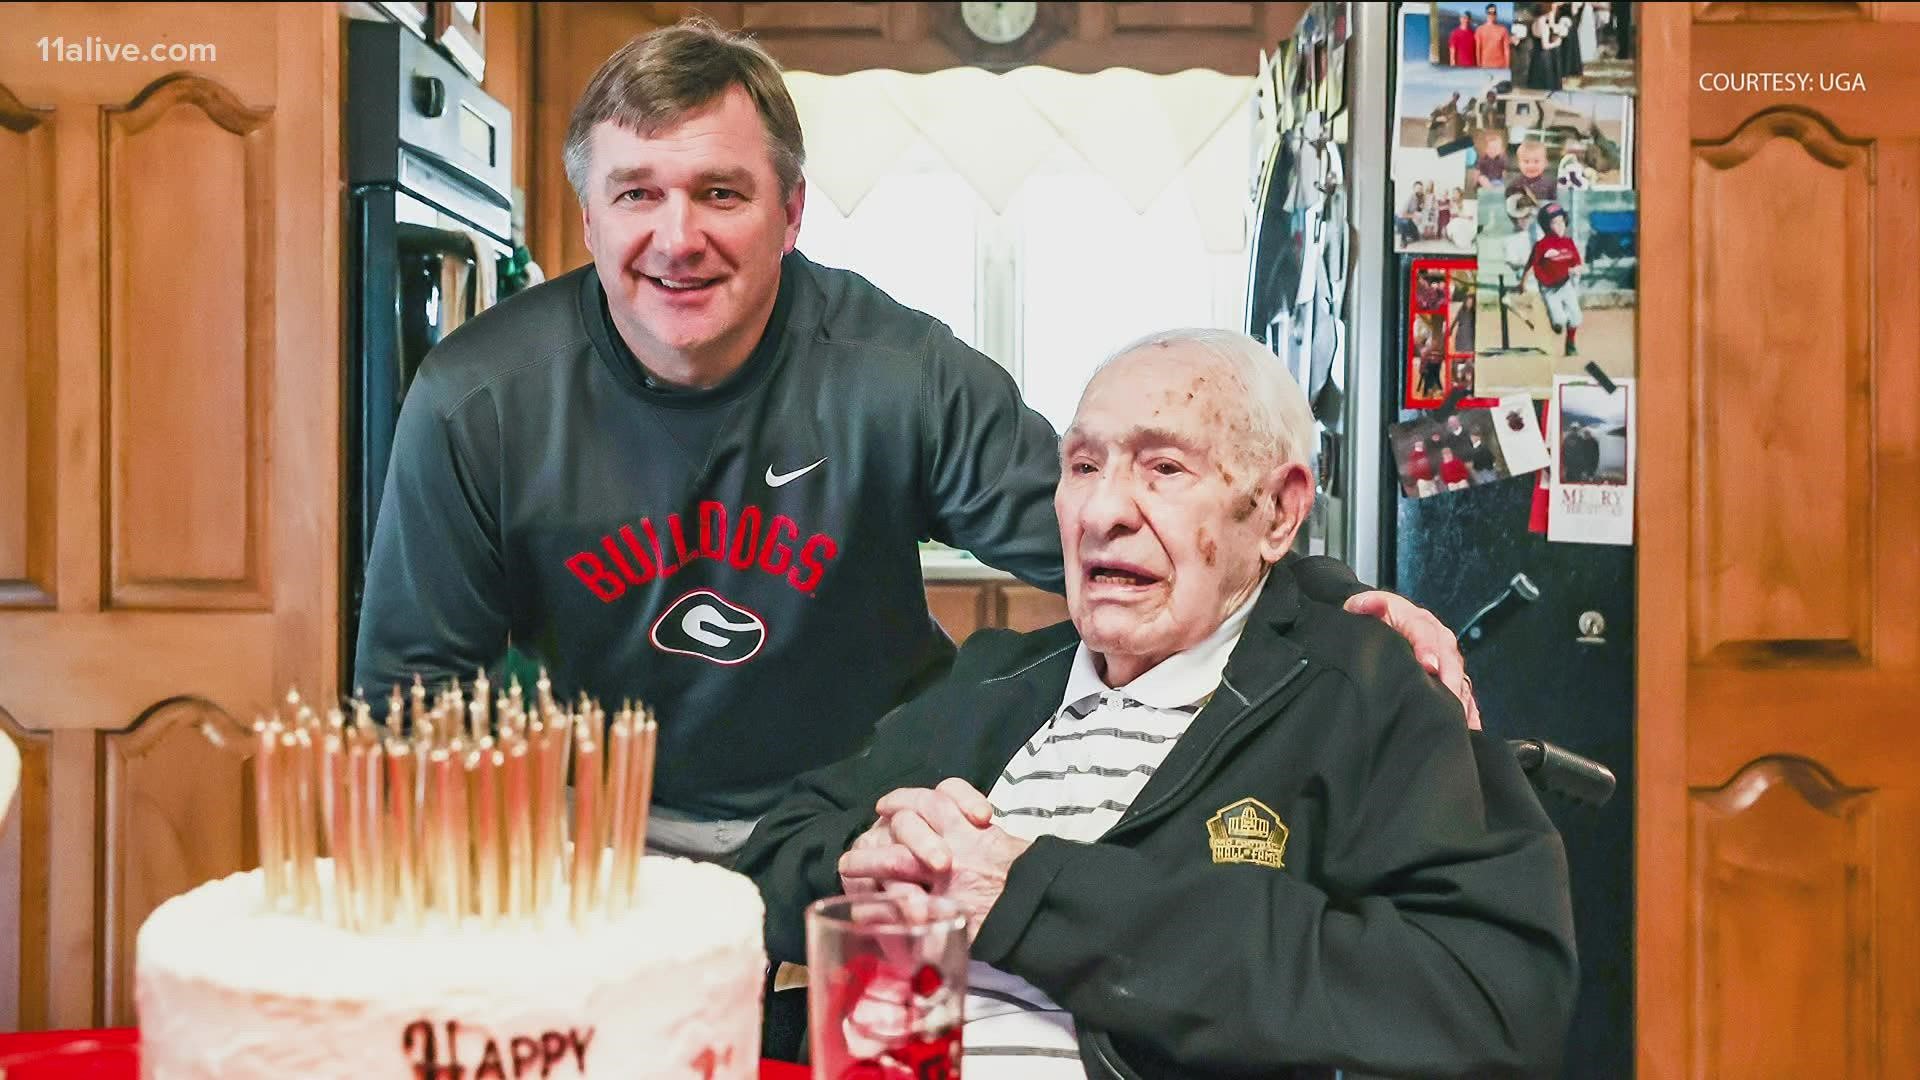 Happy birthday to a Georgia football legend, who turned 100 years old on Tuesday.